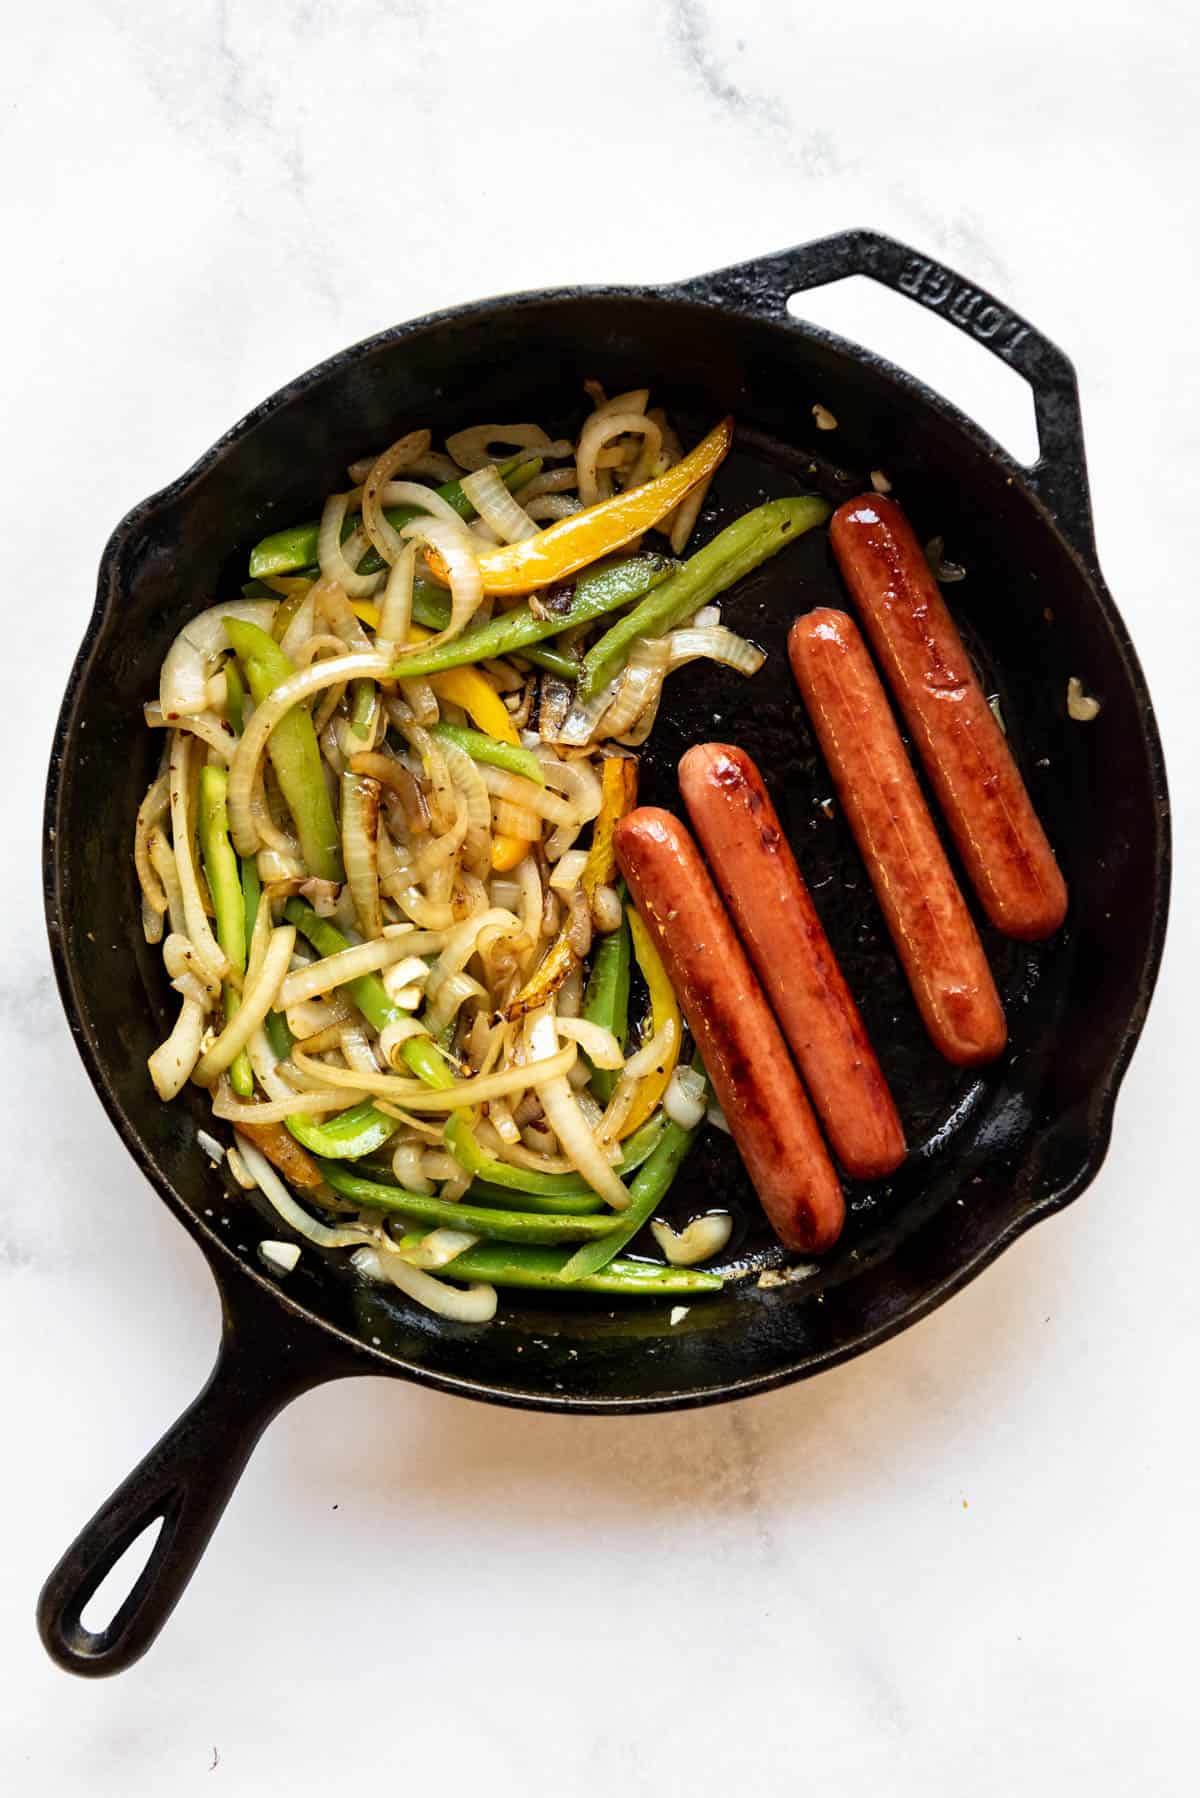 A large cast iron skillet with hot dogs and vegetables in it.